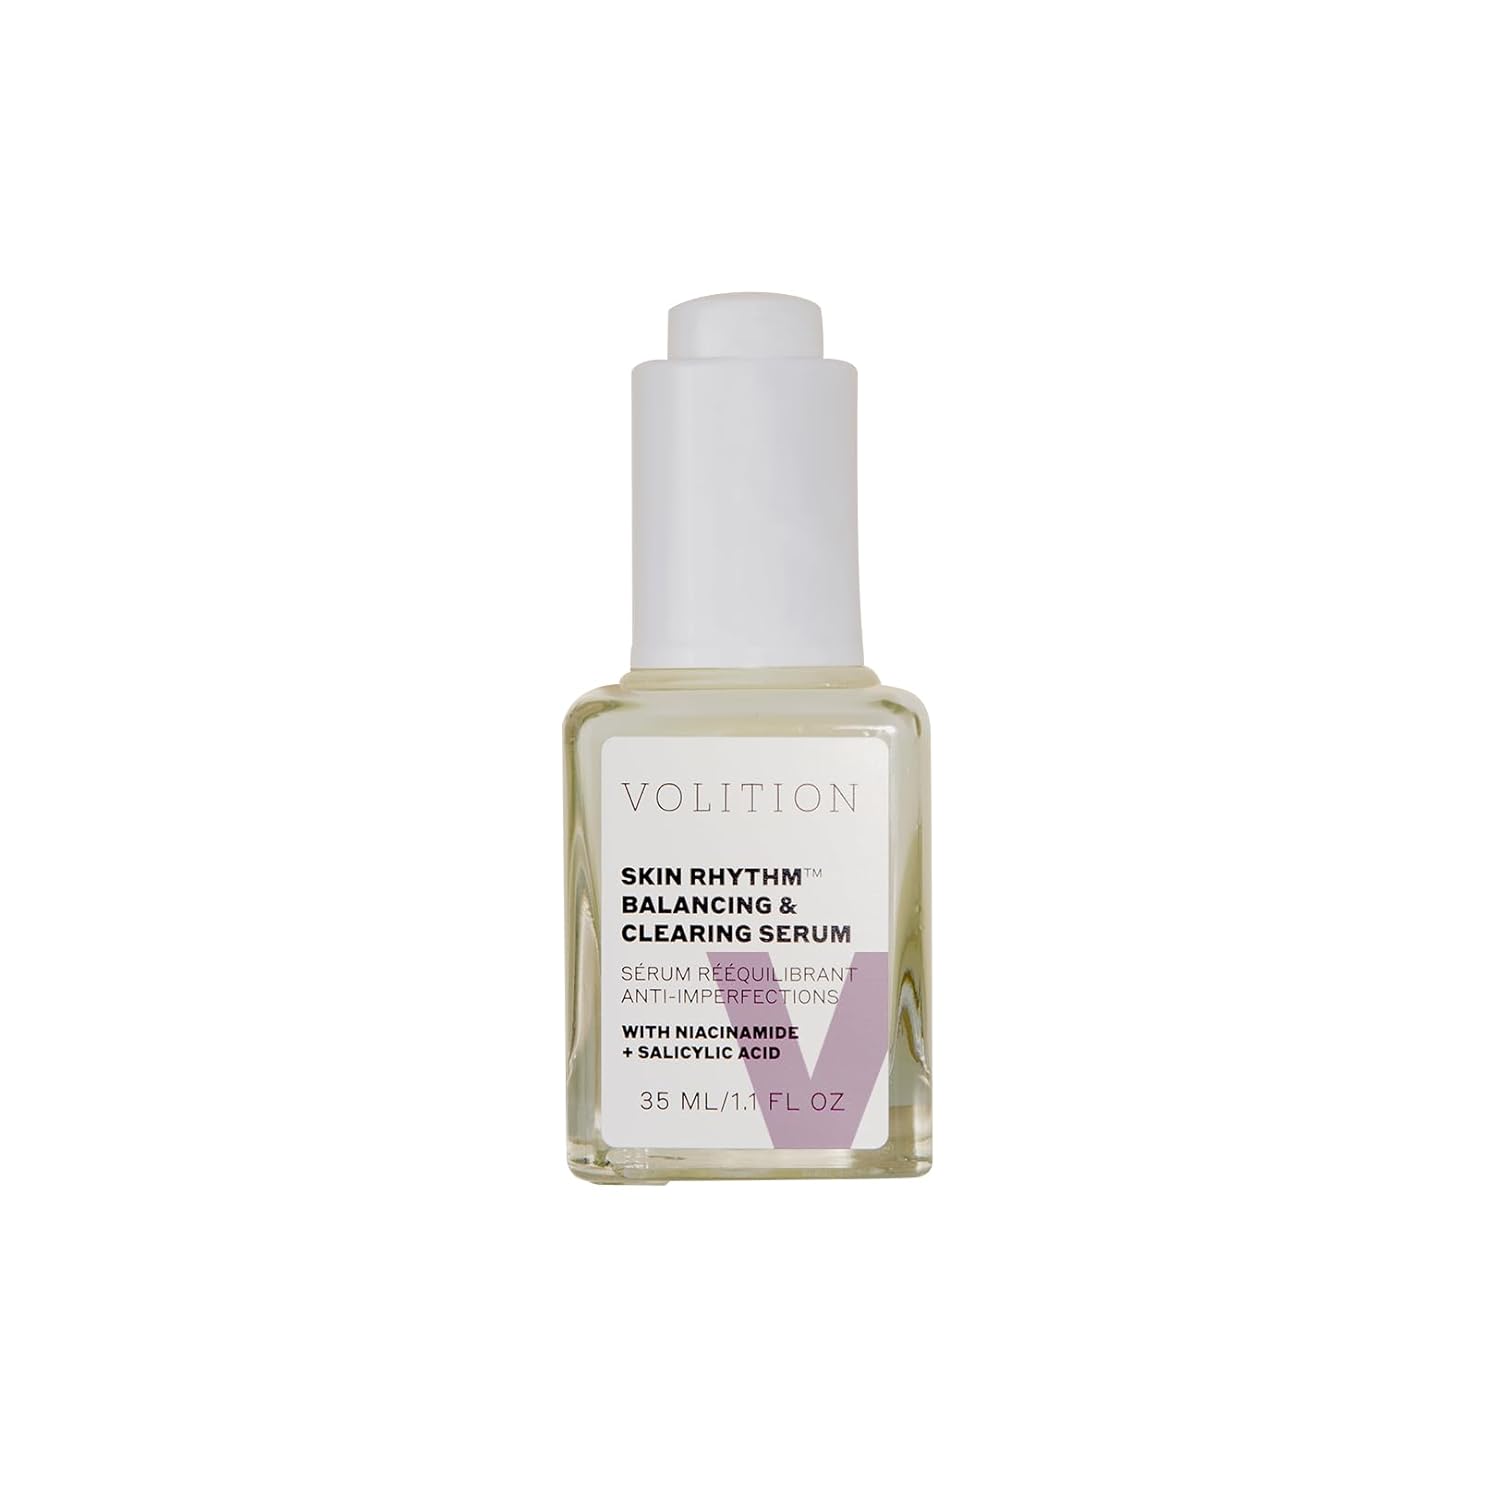 Volition Beauty Skin Rhythm Balancing & Clearing Serum - Acne & Blemish Serum Helps Even Skin Tone & Fade the Appearance of Dark Spots & Acne Scars - Exfoliating Acids & Niacinamide (35 / 1.1  )